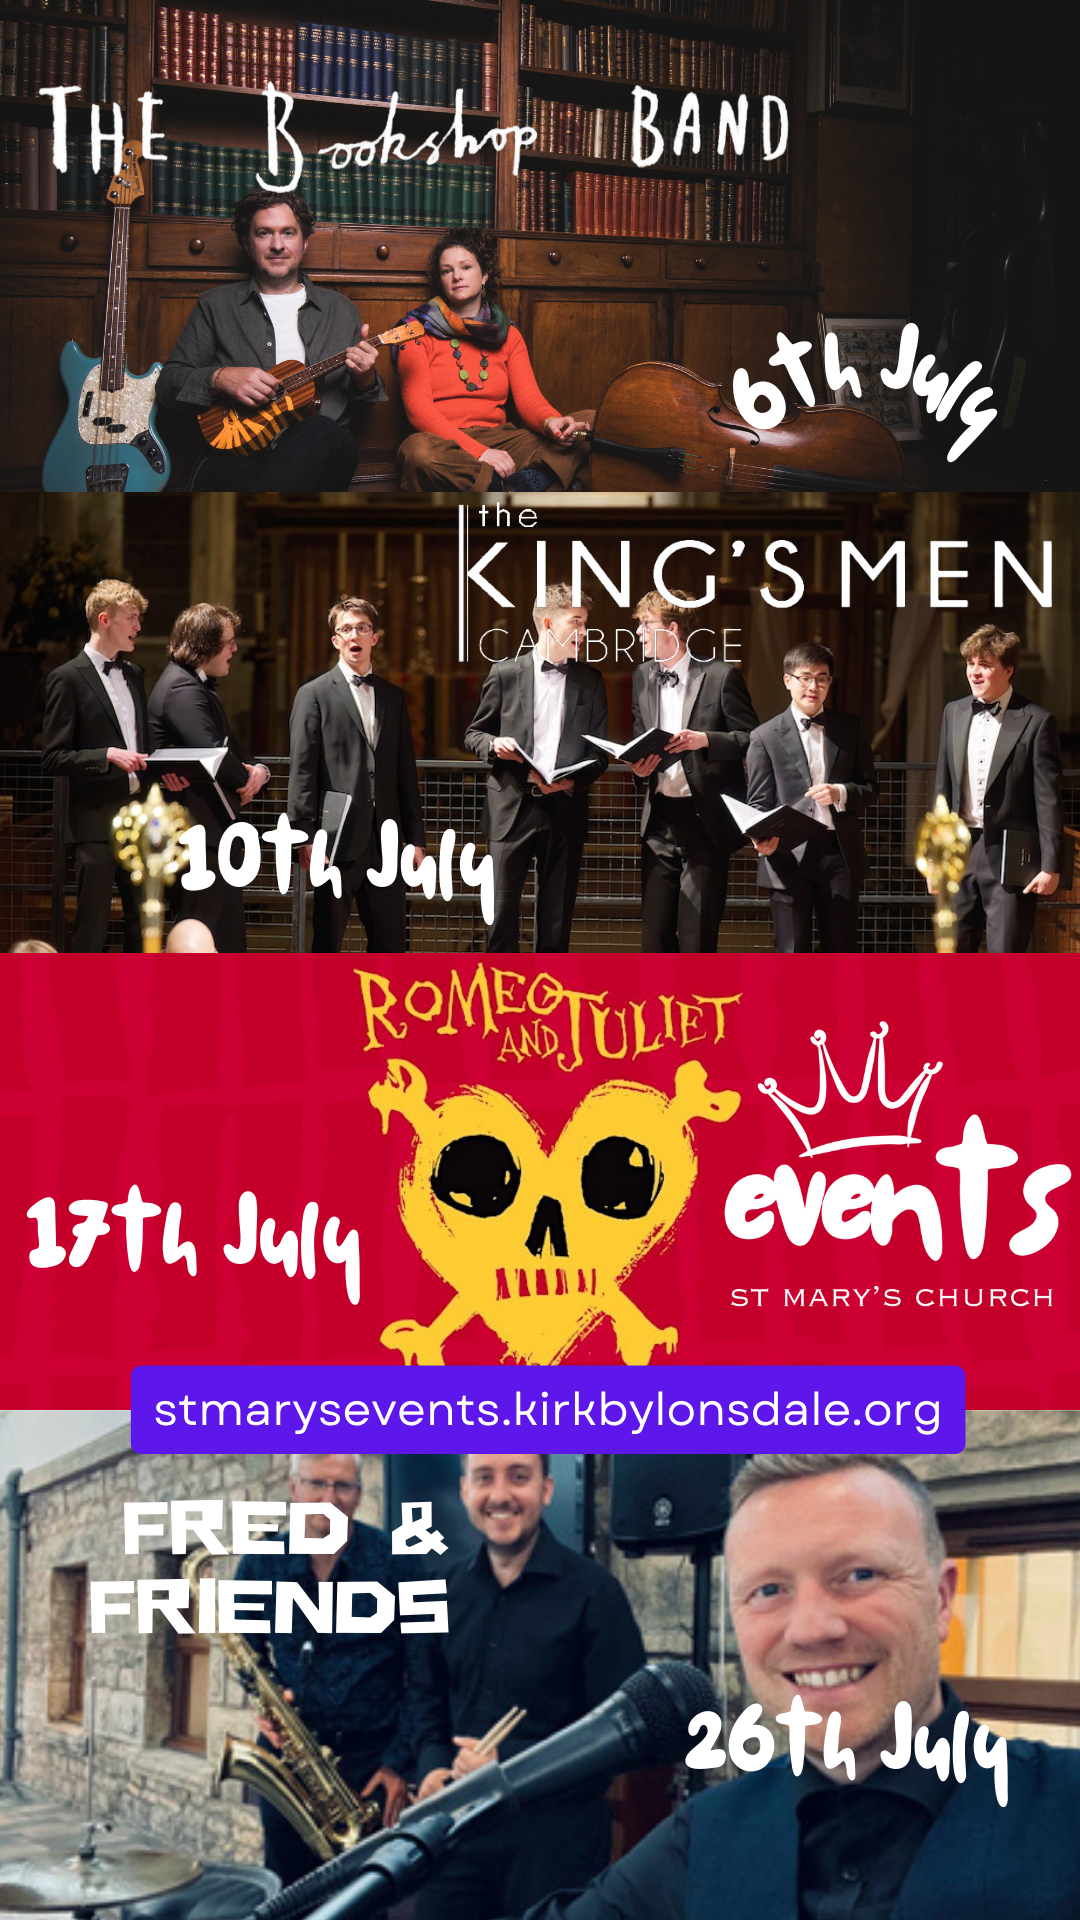 St Mary's events in July